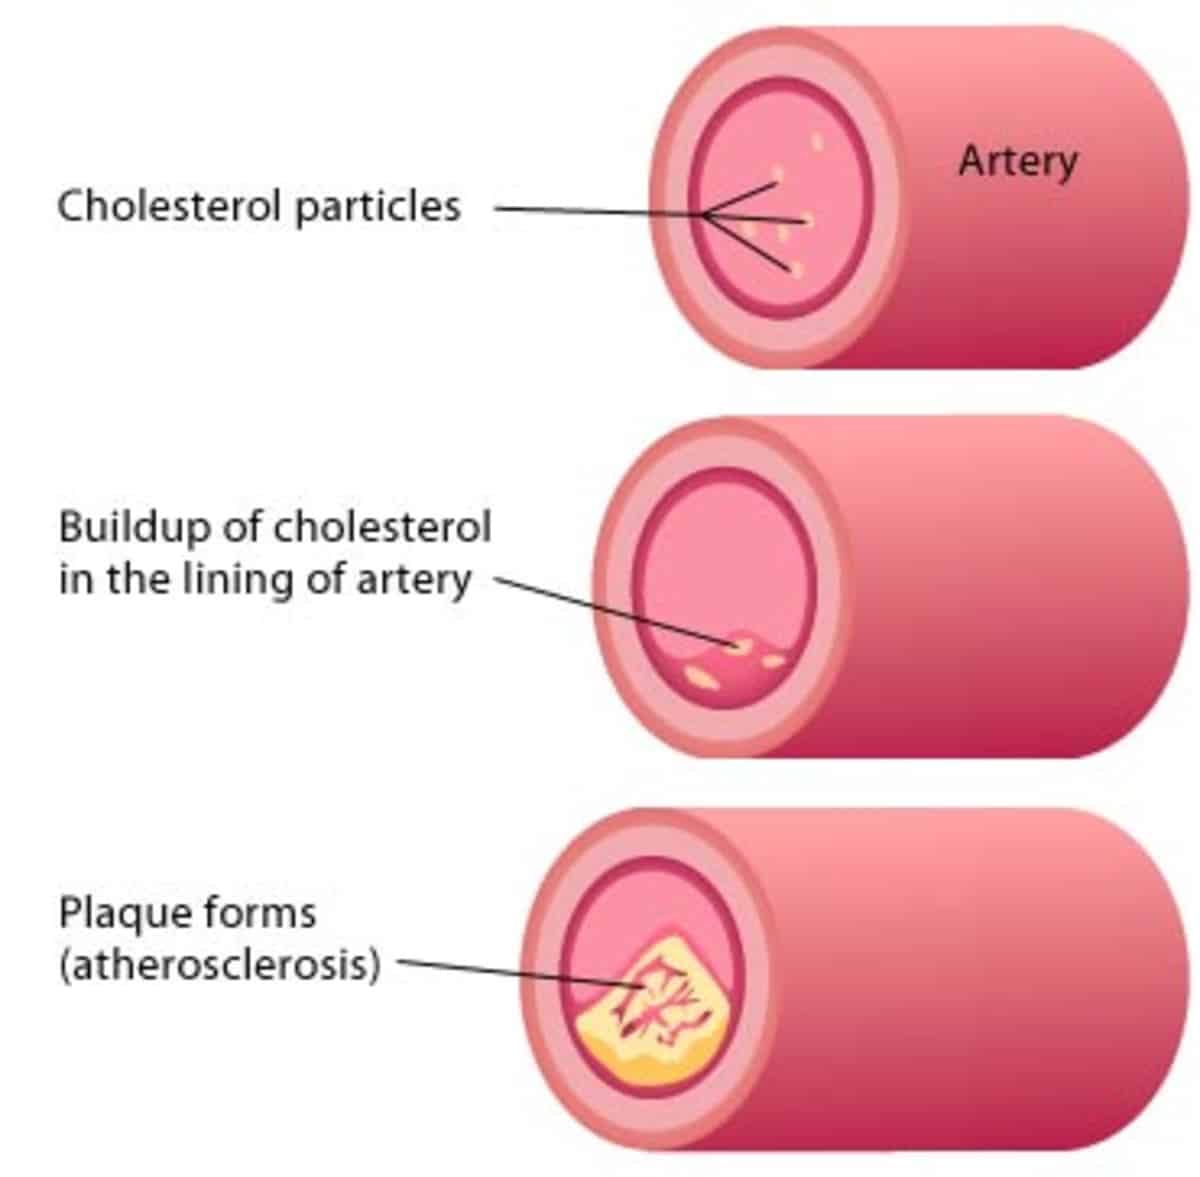 How can I reduce my cholesterol without taking medication?